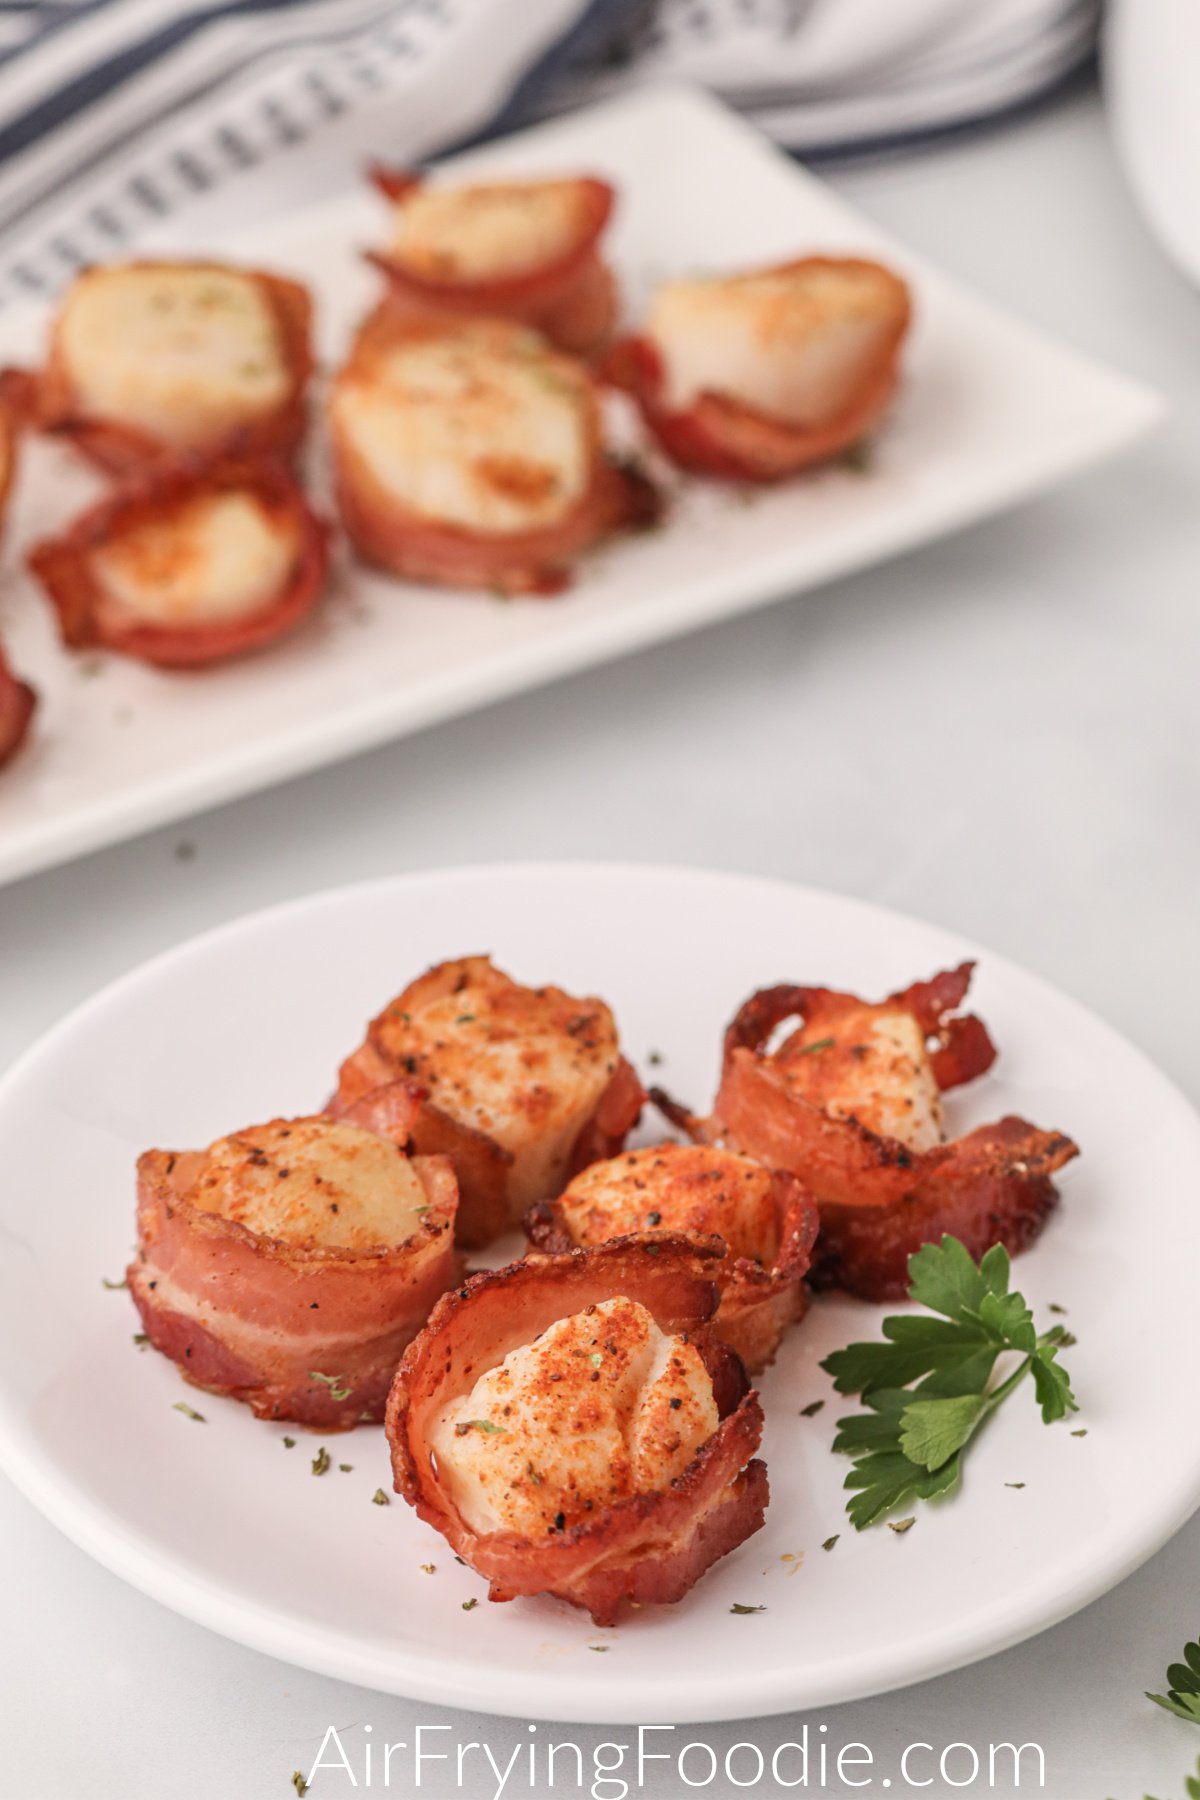 Air fryer bacon wrapped scallops on a white plate ready to serve.